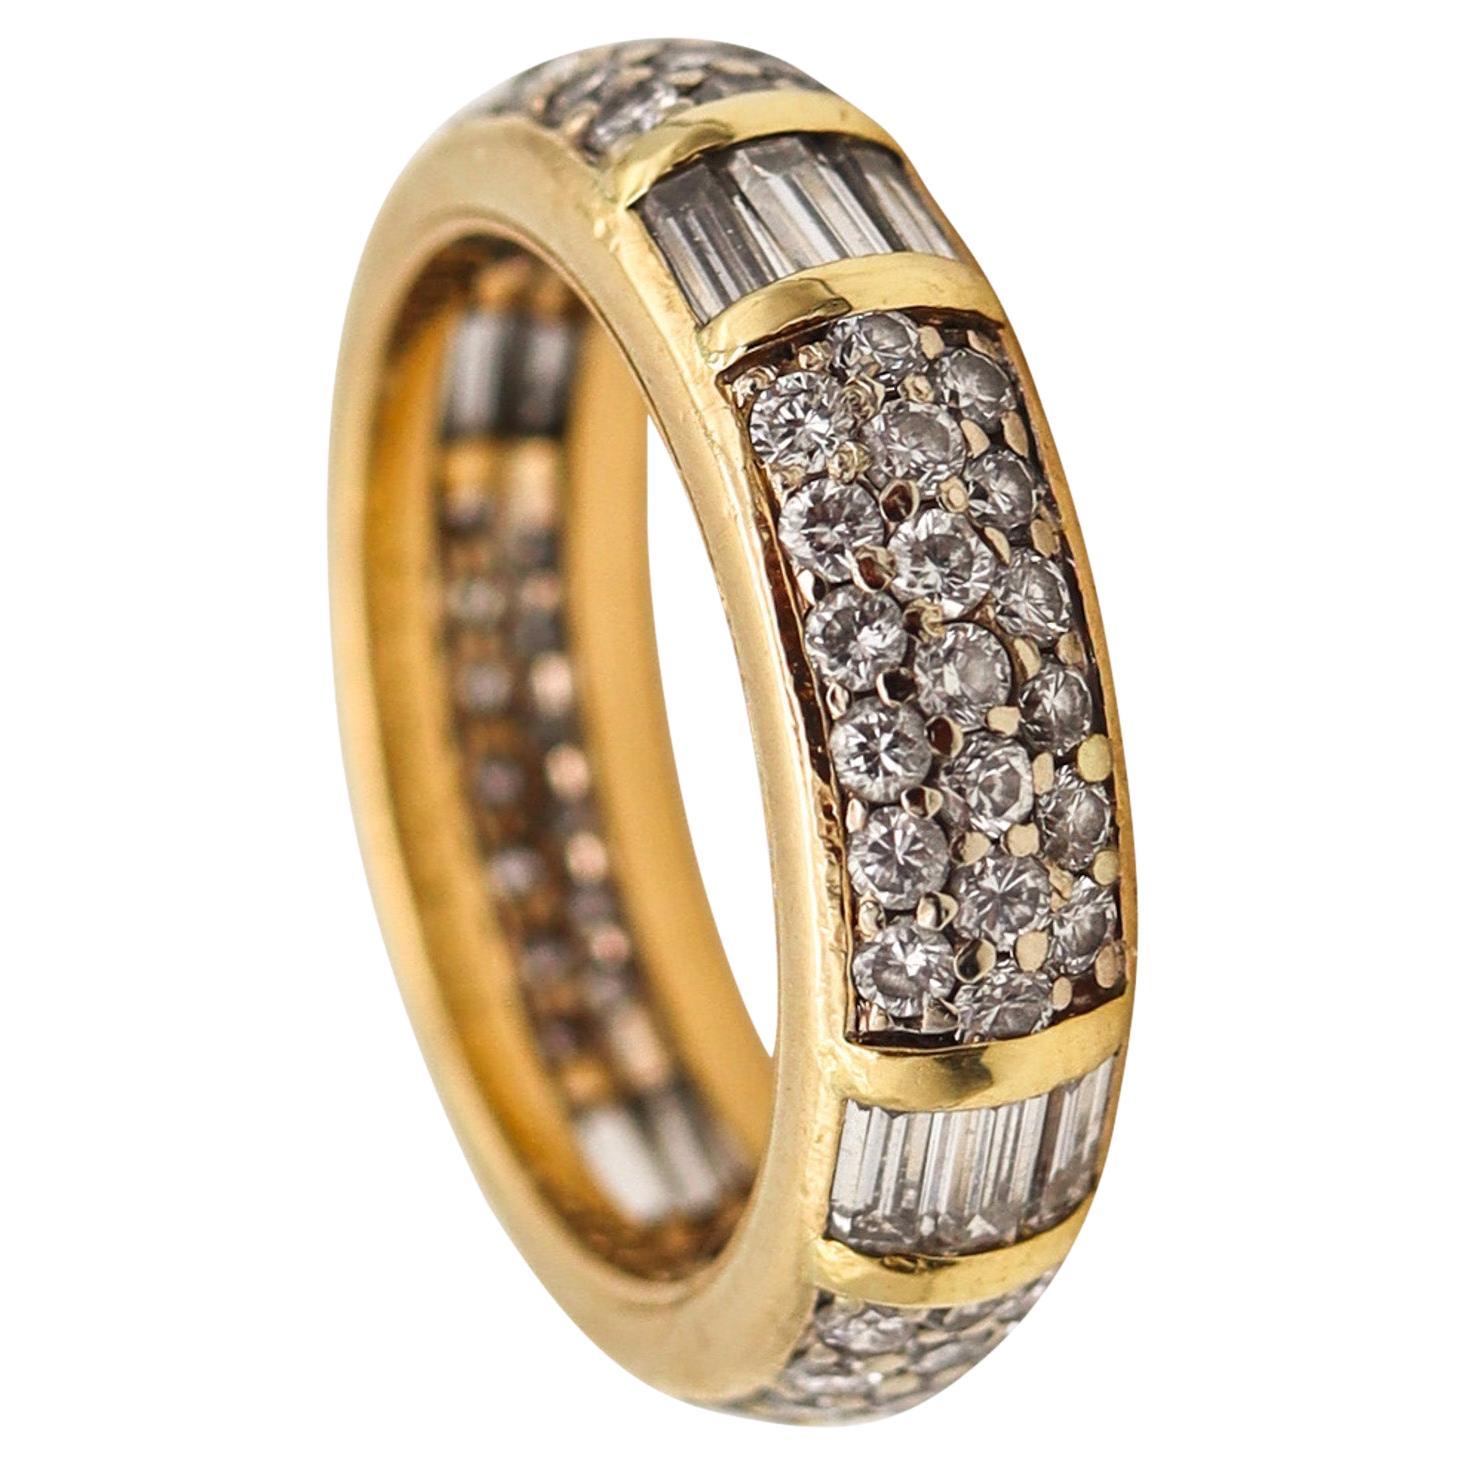 Cartier Paris Unusual Eternity Ring In 18Kt Yellow Gold With 2.12 Ctw Diamonds For Sale